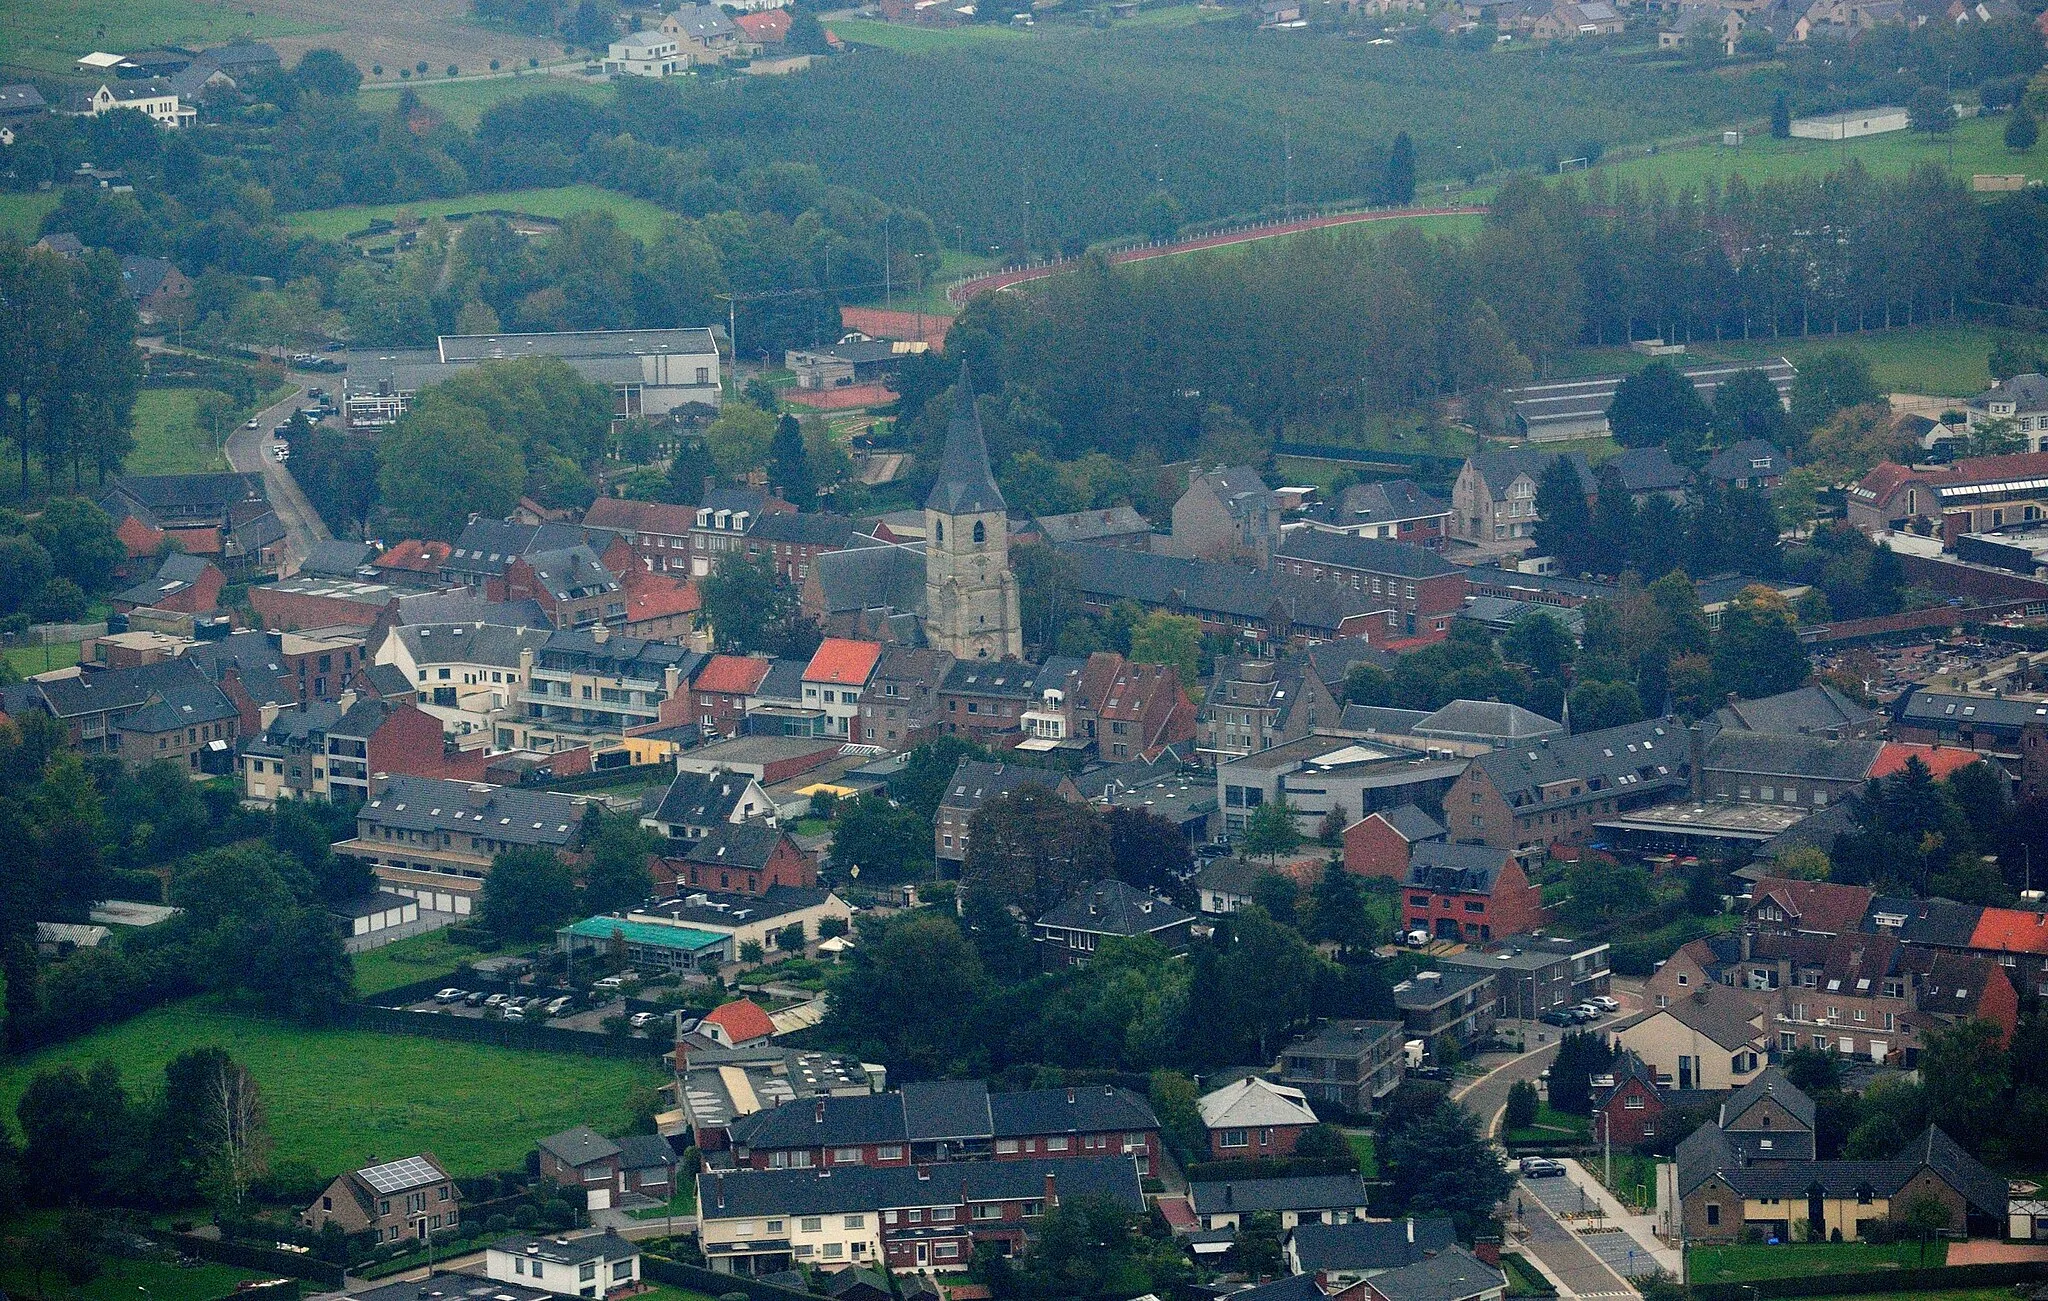 Photo showing: Aerial view of central Alken, Belgium. Near the centre of the picture is Saint Aldegonde's church. Nikon D60 f=105mm f/7.1 at 1/800s ISO 800. Processed using Nikon ViewNX 1.5.2 and GIMP 2.6.6.